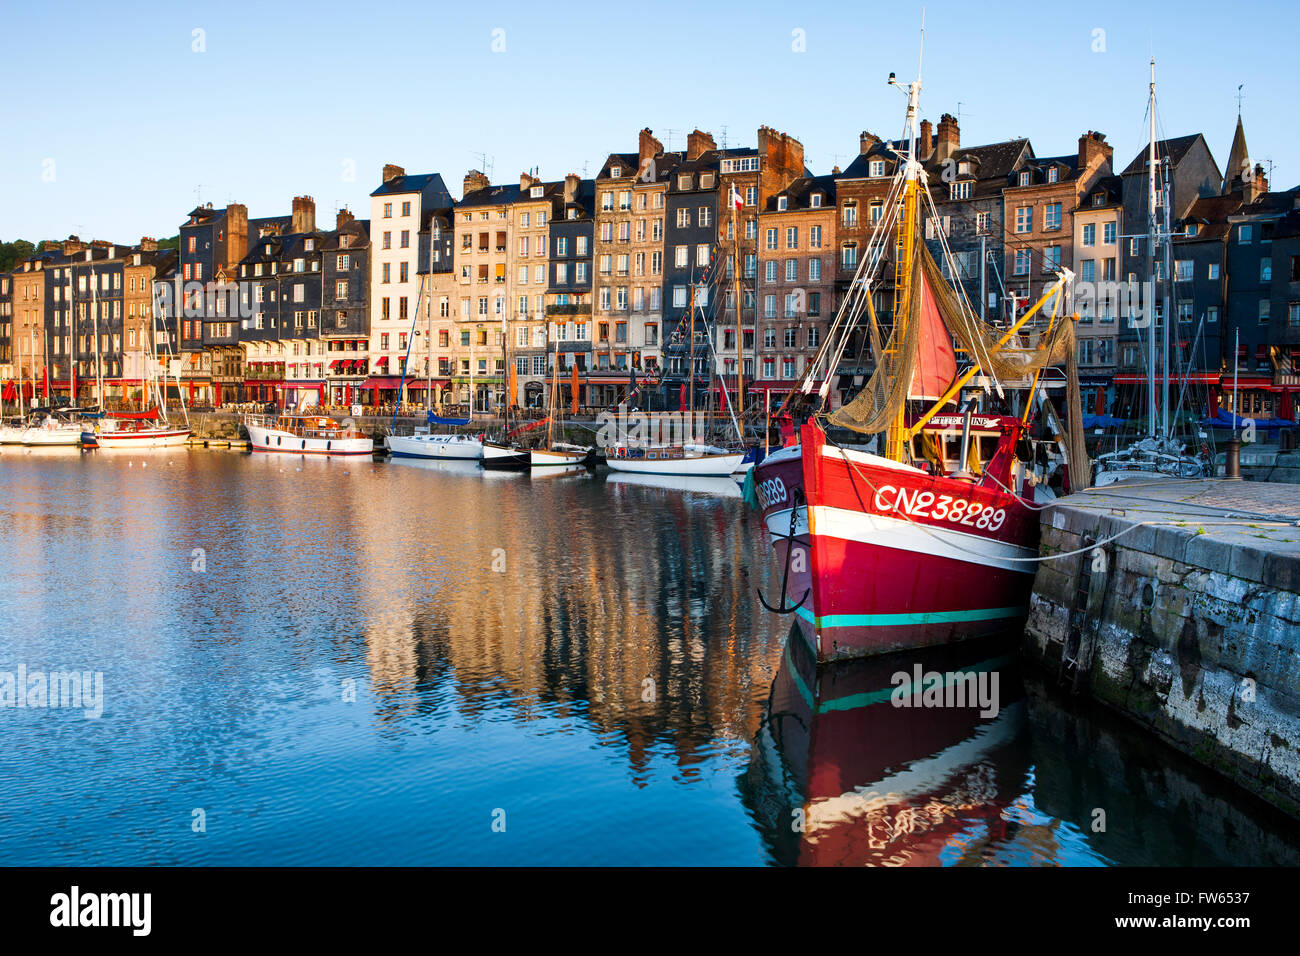 Houses and fishing boats at the old harbor with reflections in calm water, Vieux Bassin, Honfleur, Calvados, Normandy, France Stock Photo